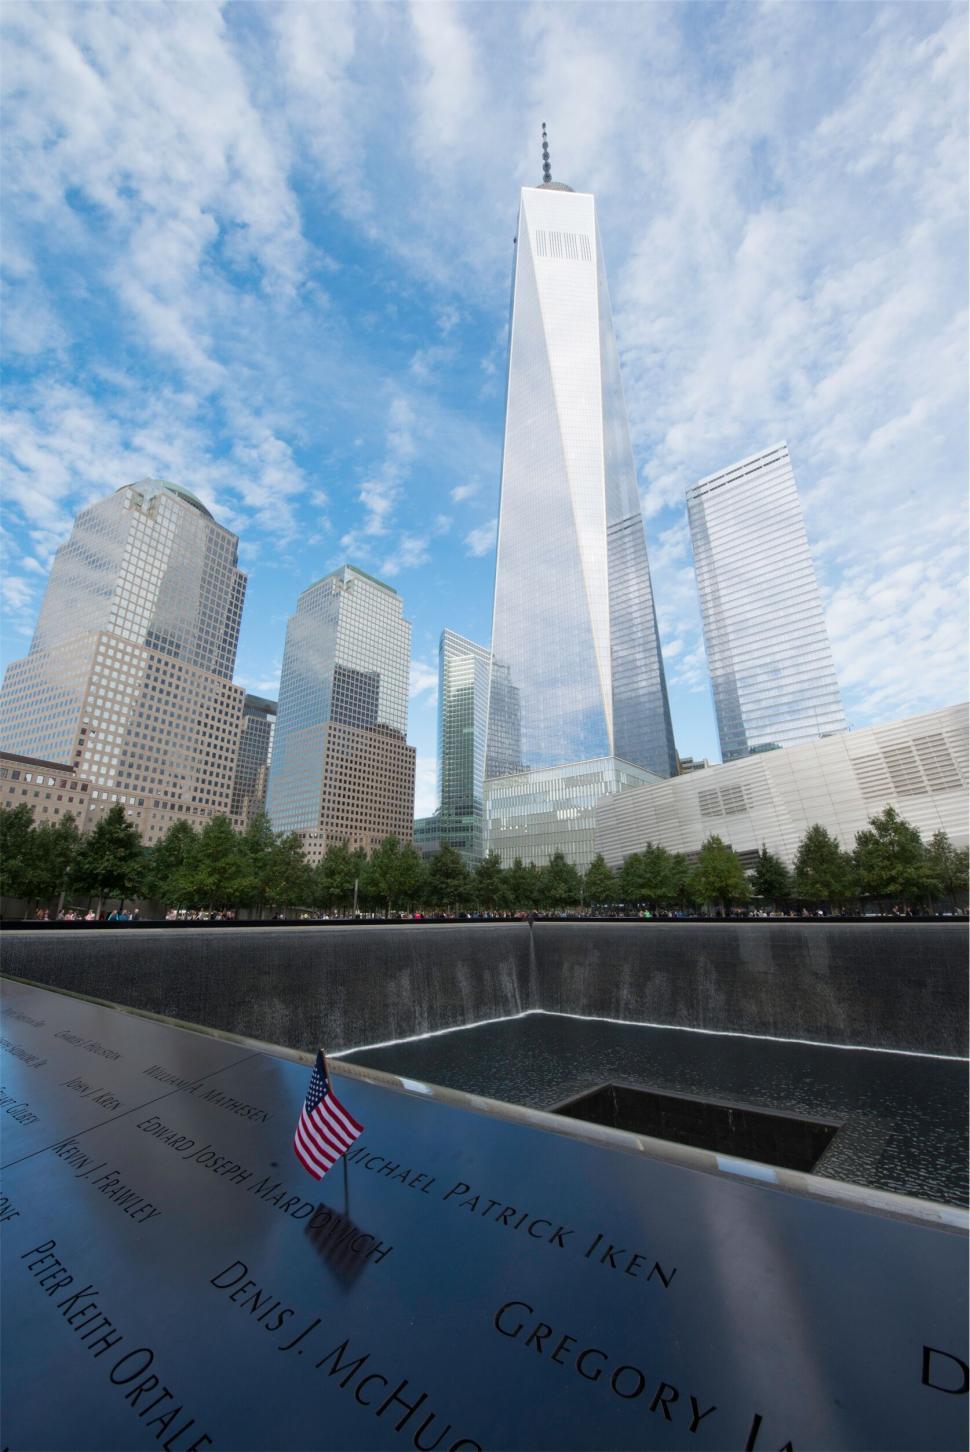 Free Image of One World Trade Center and 911 Memorial 